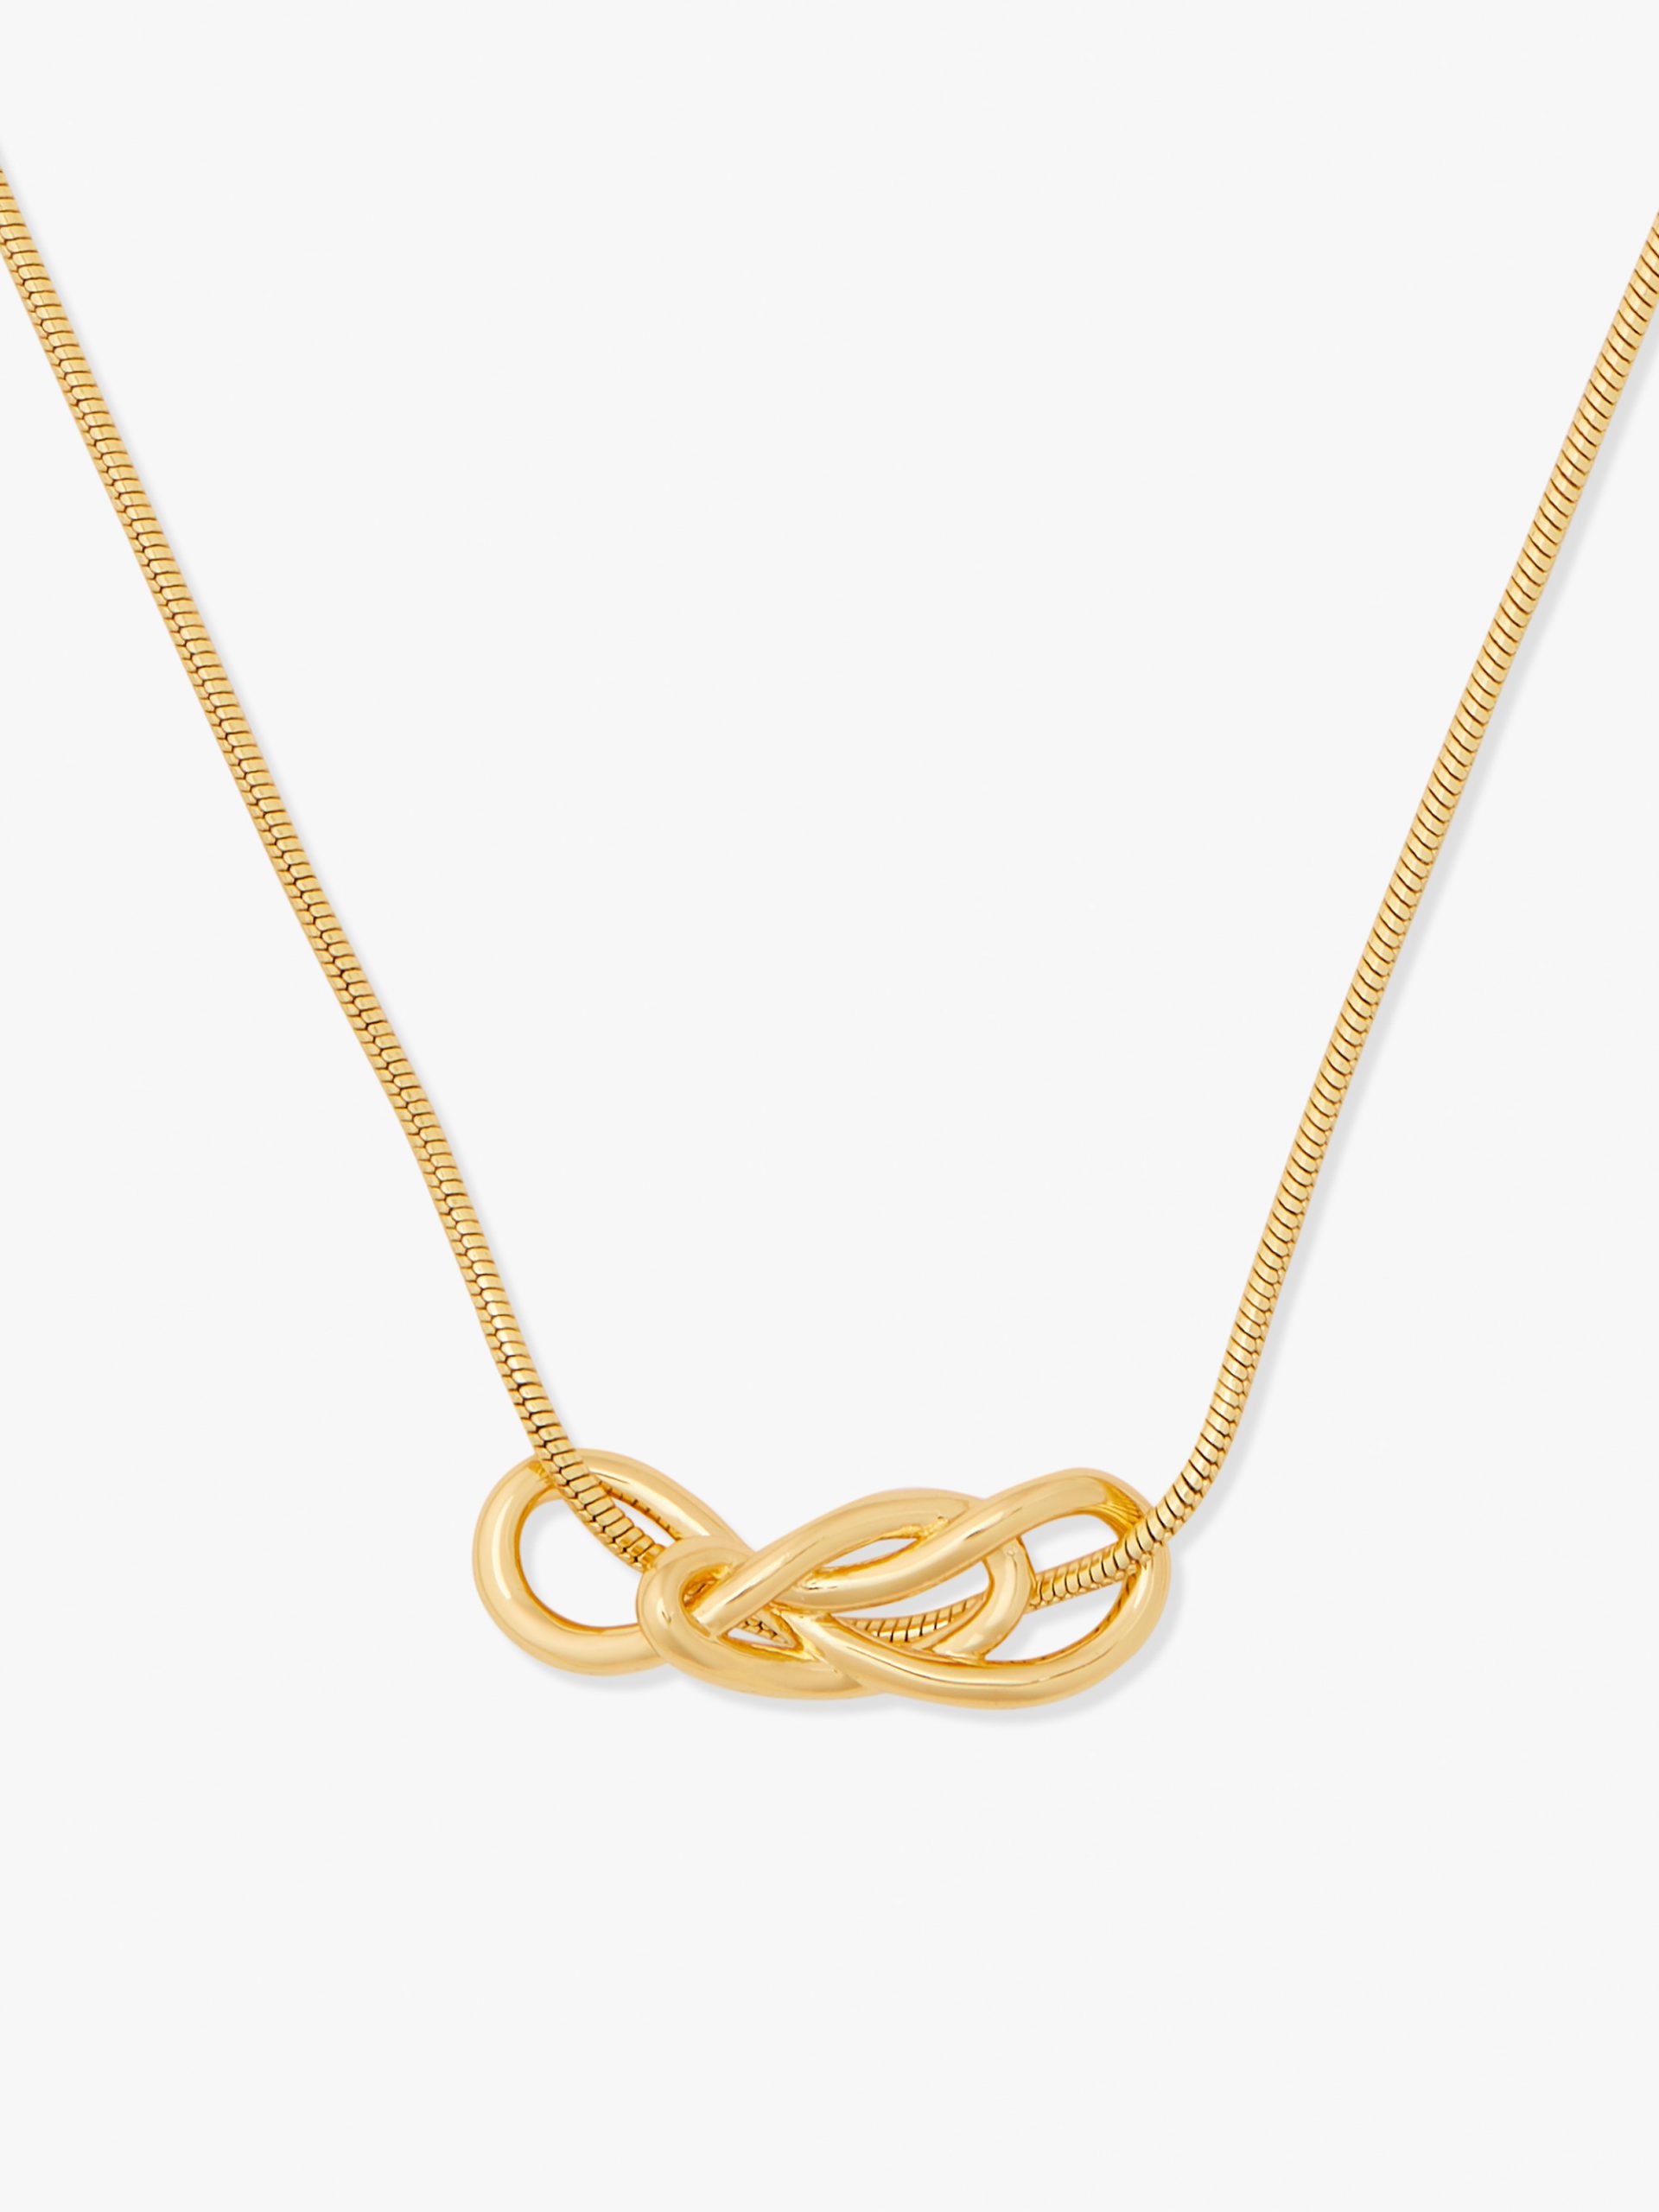 Knot Gold With a Twist Necklace